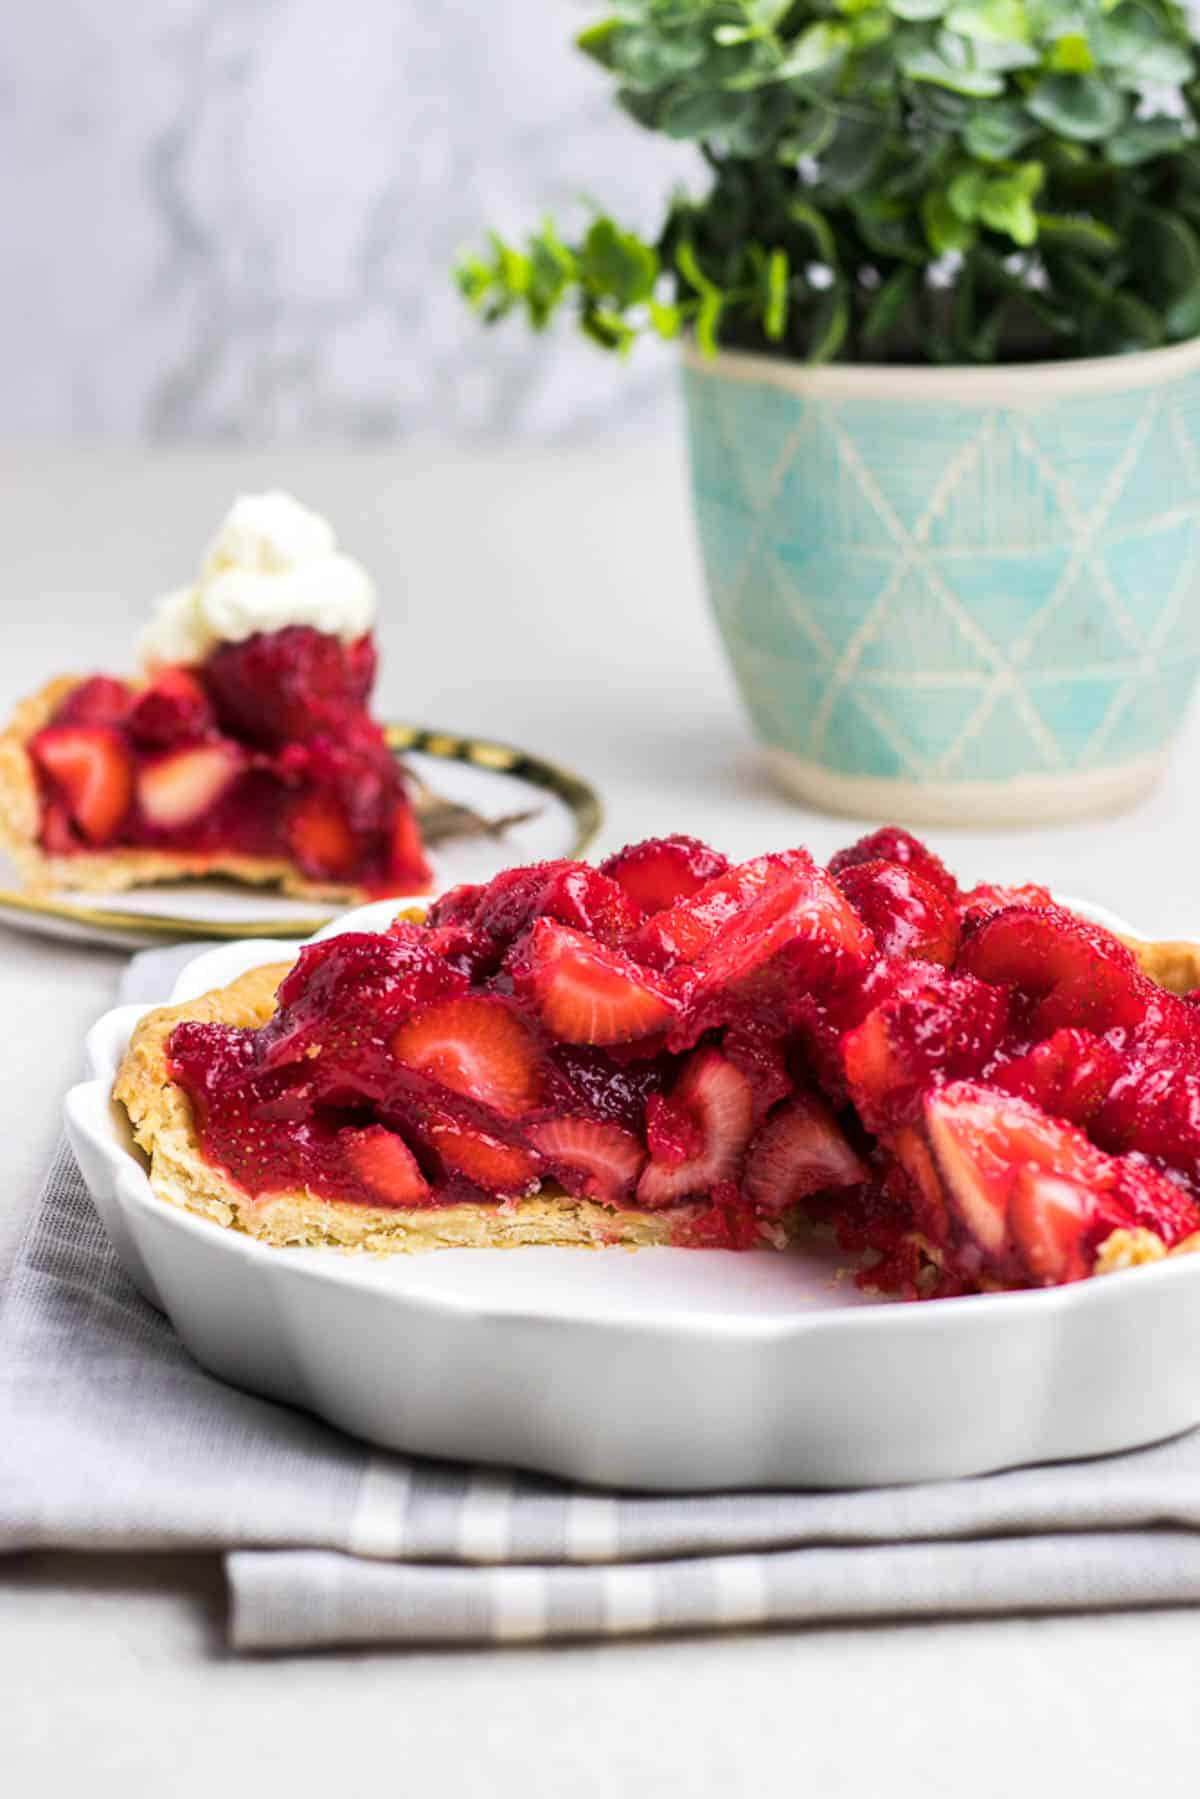 Strawberry Pie with buttery and flaky pie crust is the best dessert recipe for hot summer days!